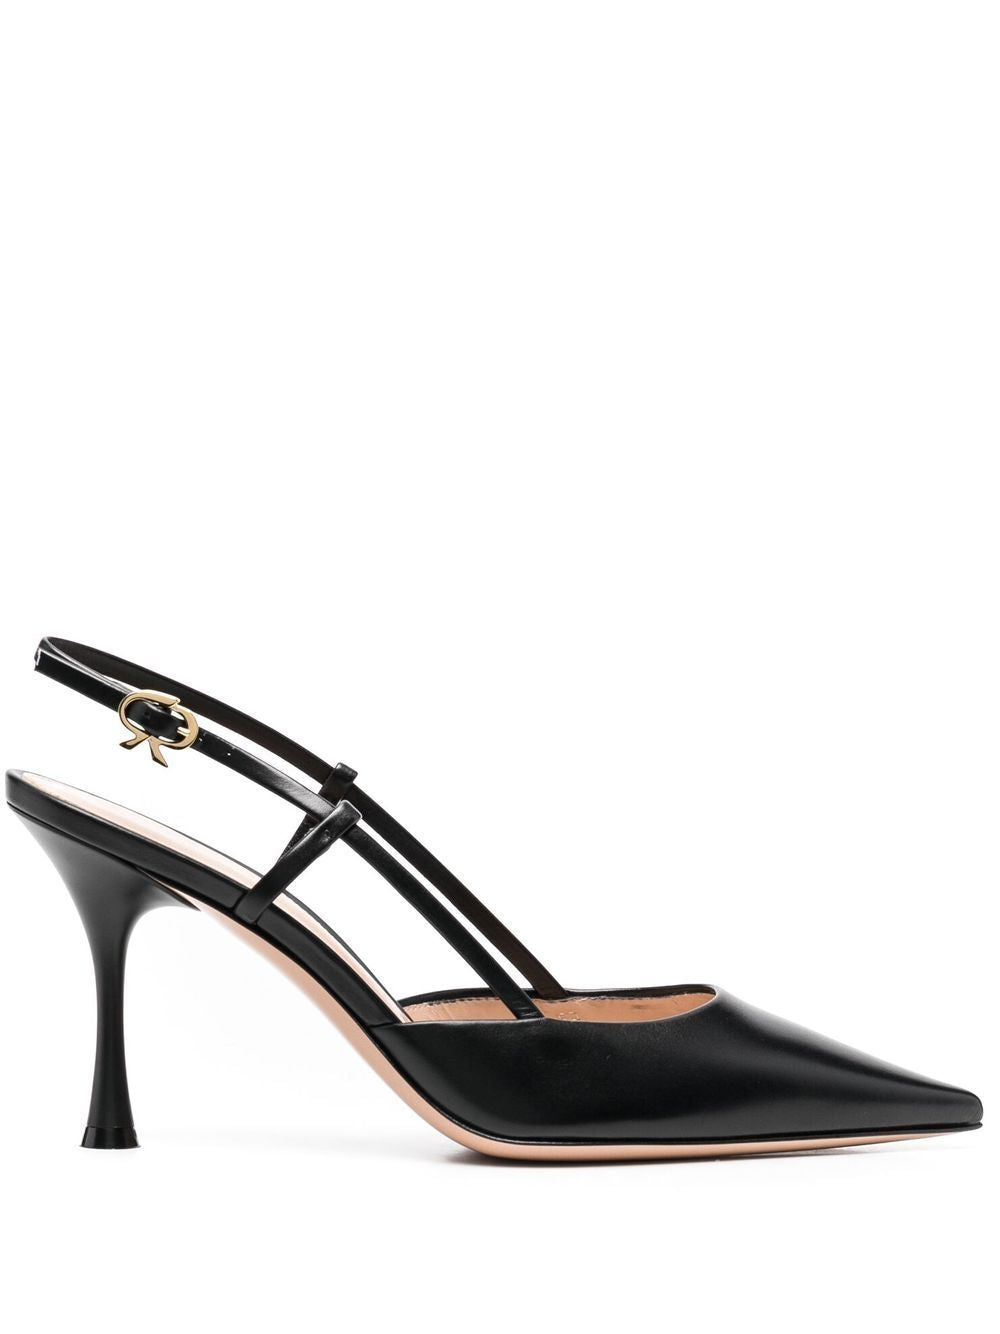 GIANVITO ROSSI Sleek Black Pumps for Women | Stylish and Comfortable